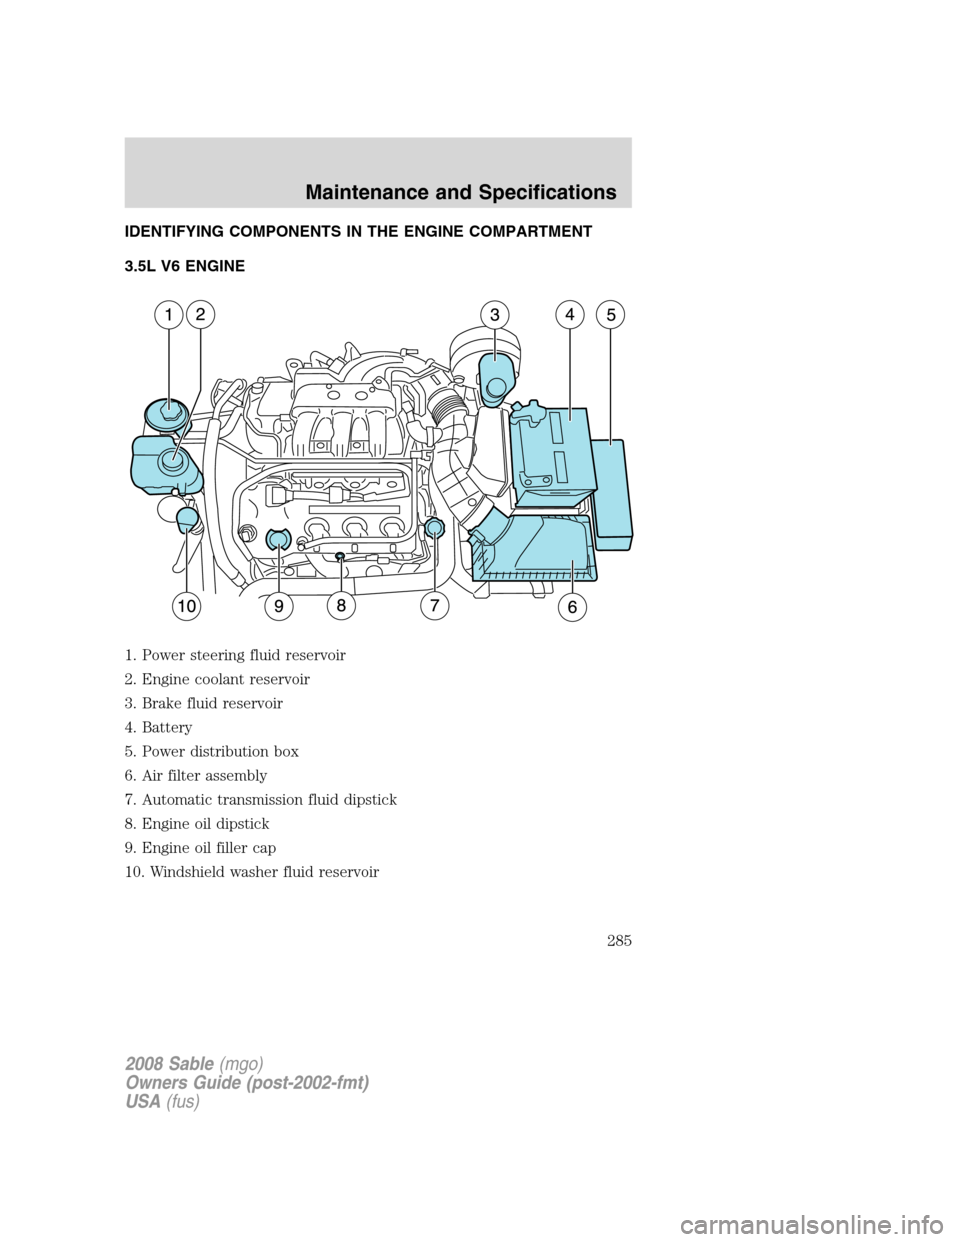 Mercury Sable 2008  Owners Manuals IDENTIFYING COMPONENTS IN THE ENGINE COMPARTMENT
3.5L V6 ENGINE
1. Power steering fluid reservoir
2. Engine coolant reservoir
3. Brake fluid reservoir
4. Battery
5. Power distribution box
6. Air filte